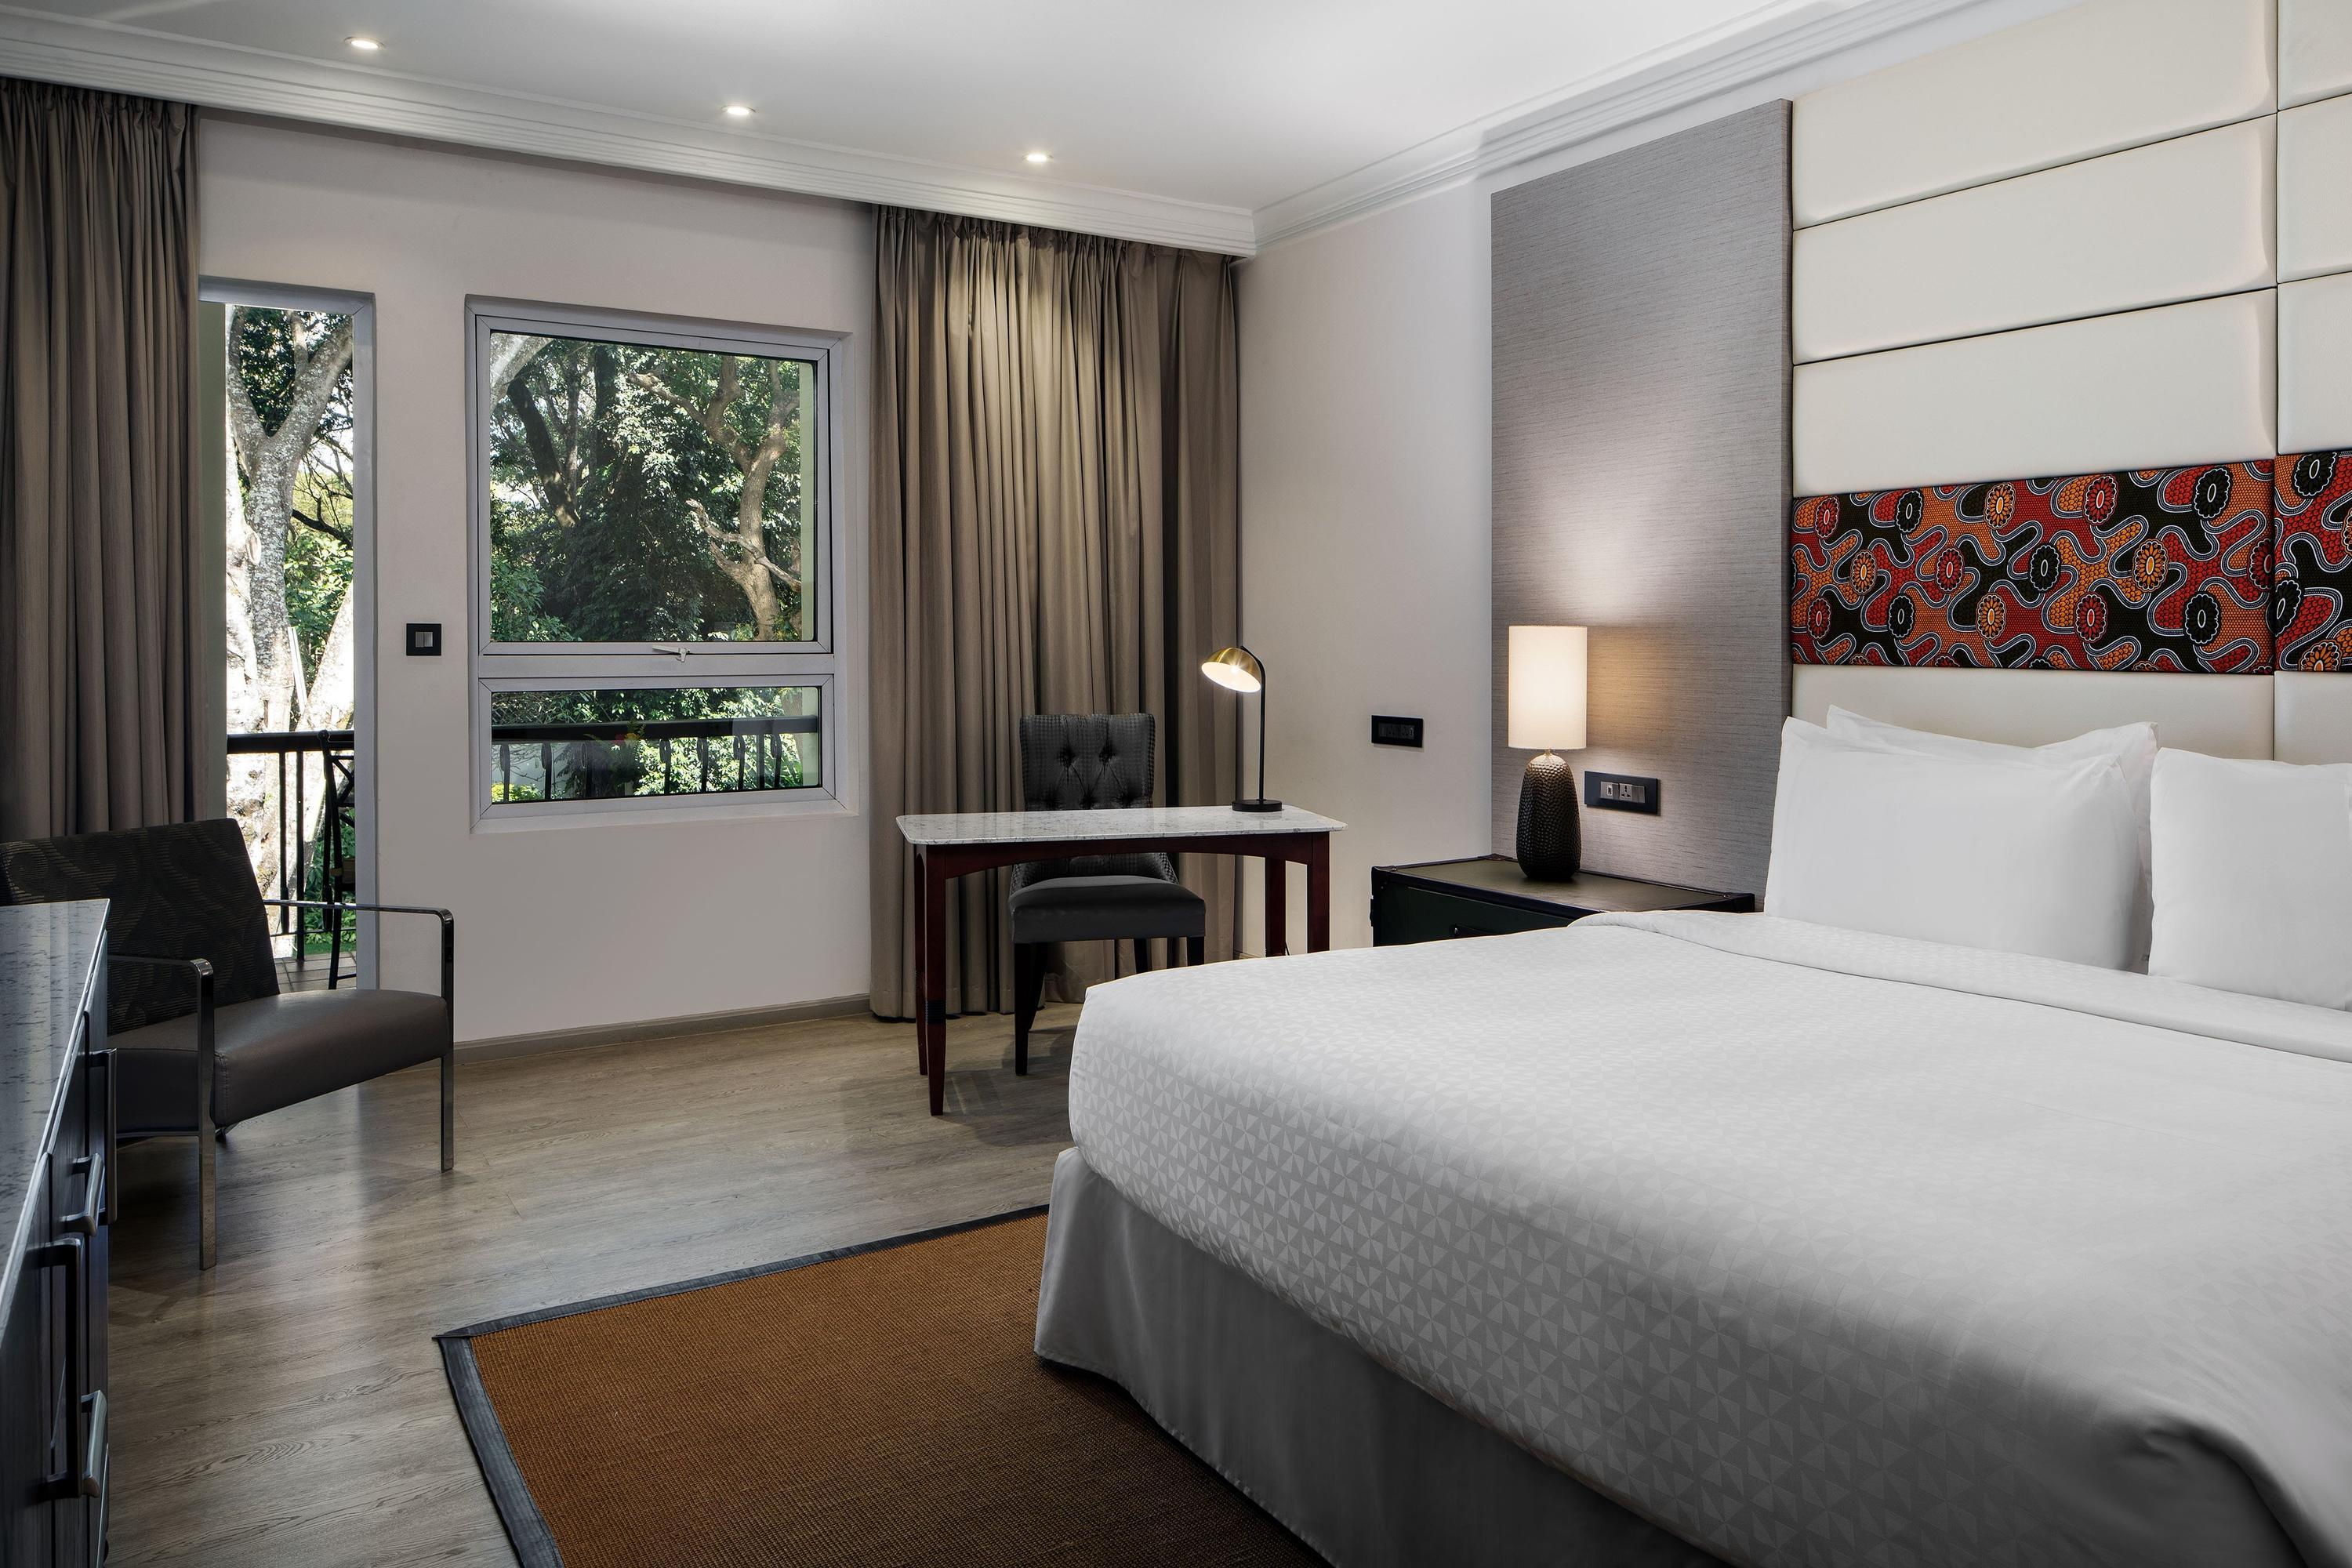 THE 10 CLOSEST Hotels to Svelte Hotel and Personal Suites, New Delhi